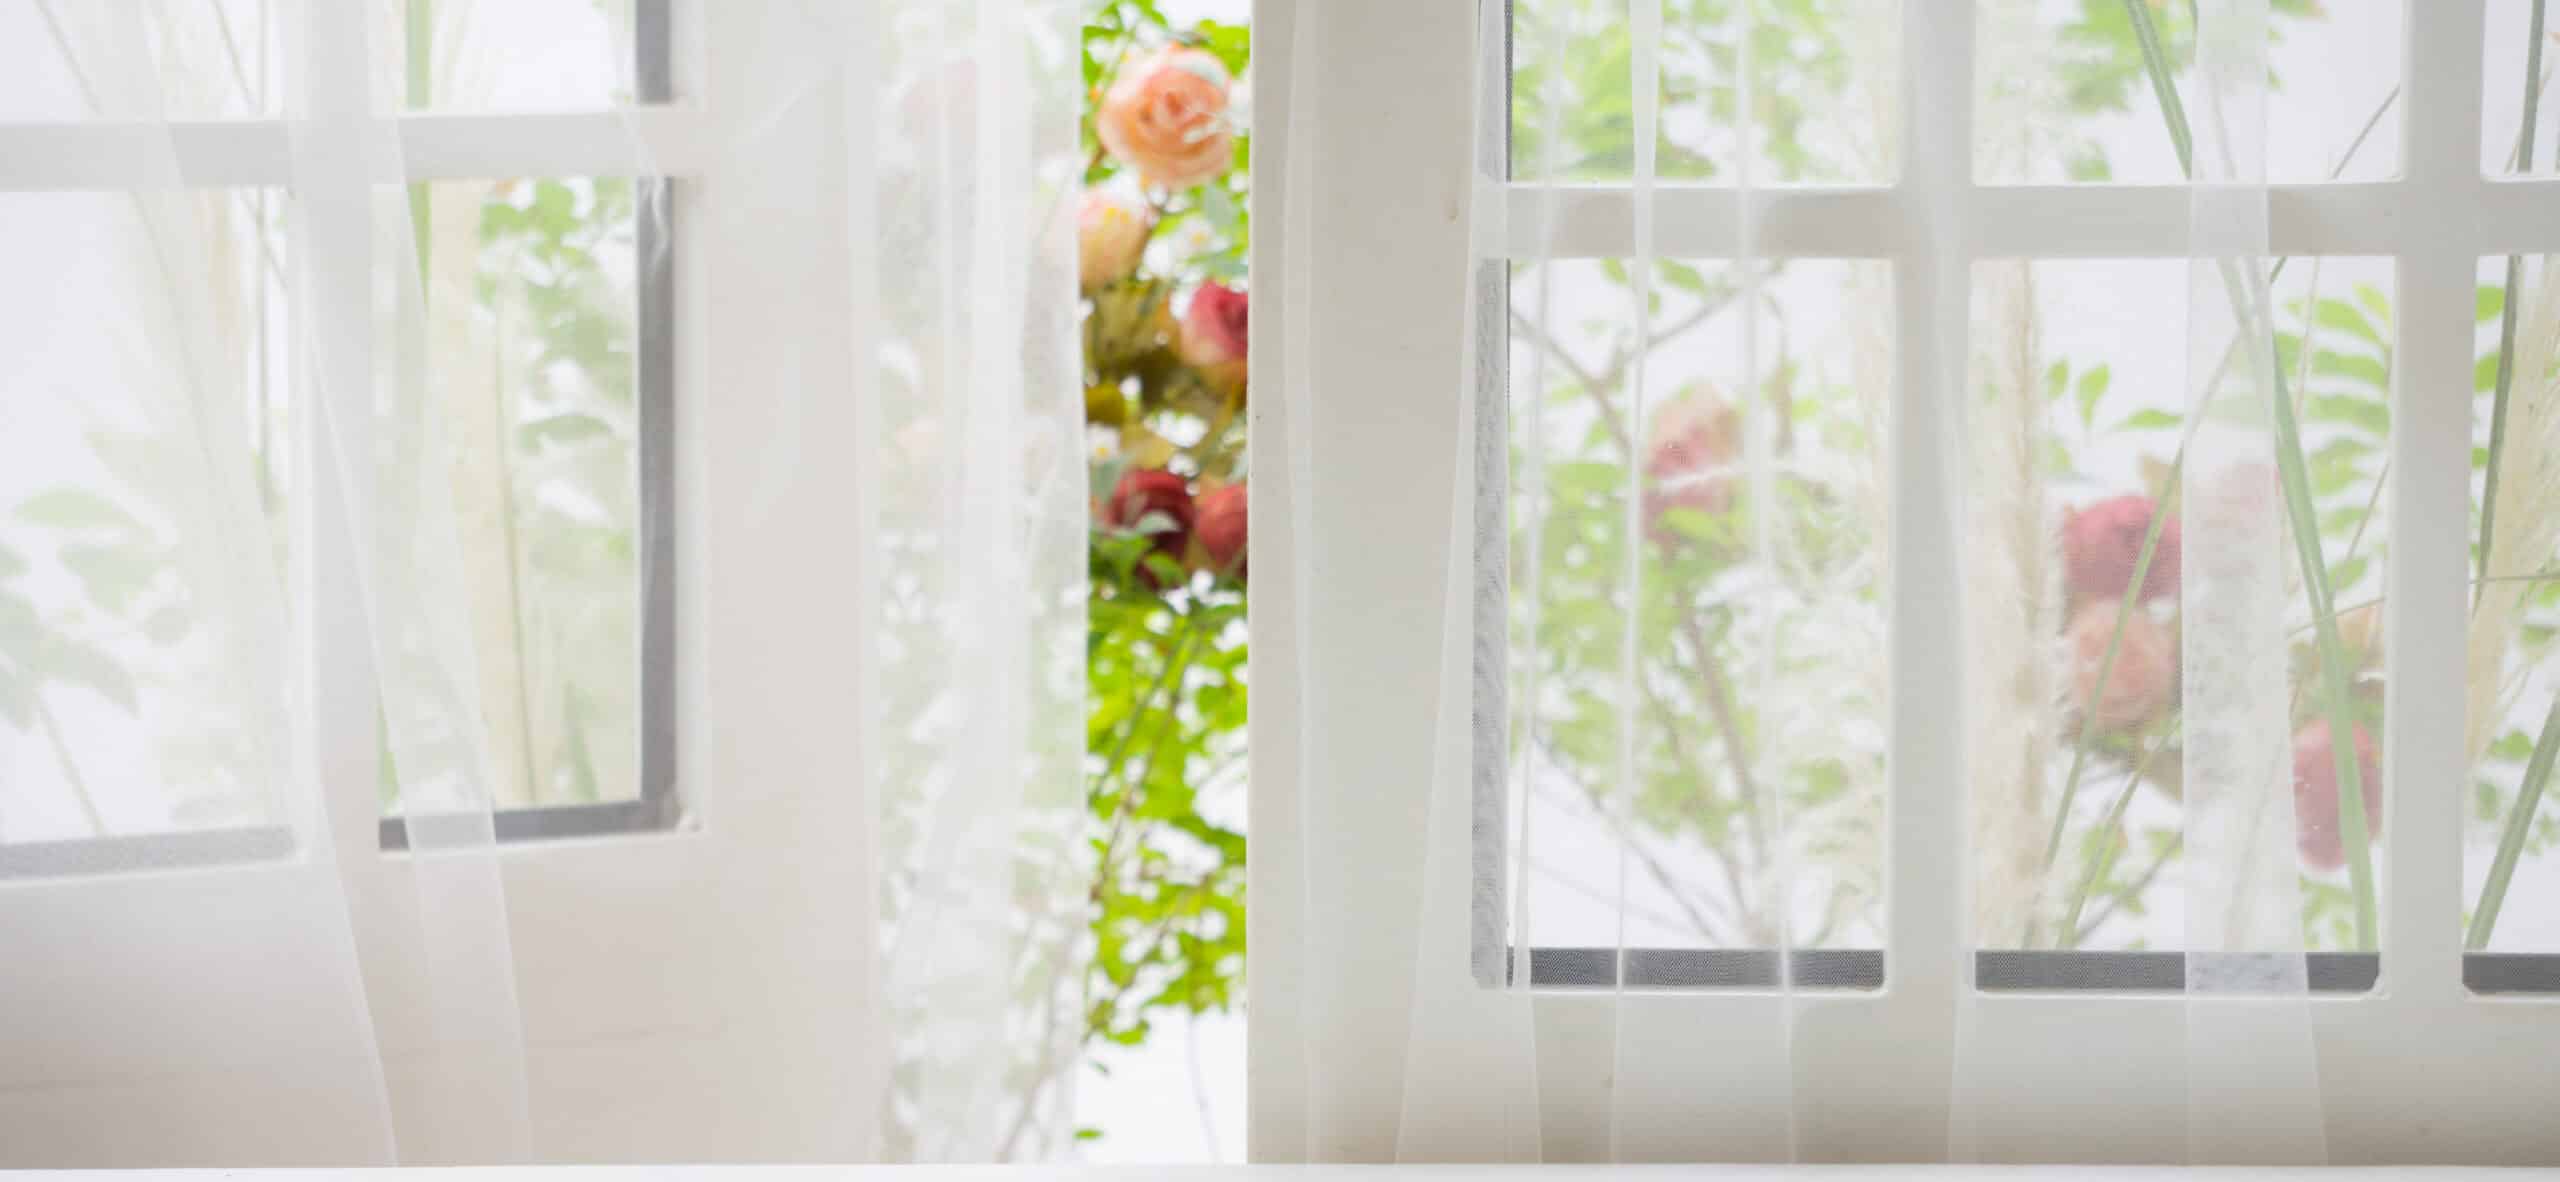 Sheer white curtains billow gently in a breezy room with a view of a garden through an energy-efficient windowpane, showing glimpses of green leaves and pink flowers.